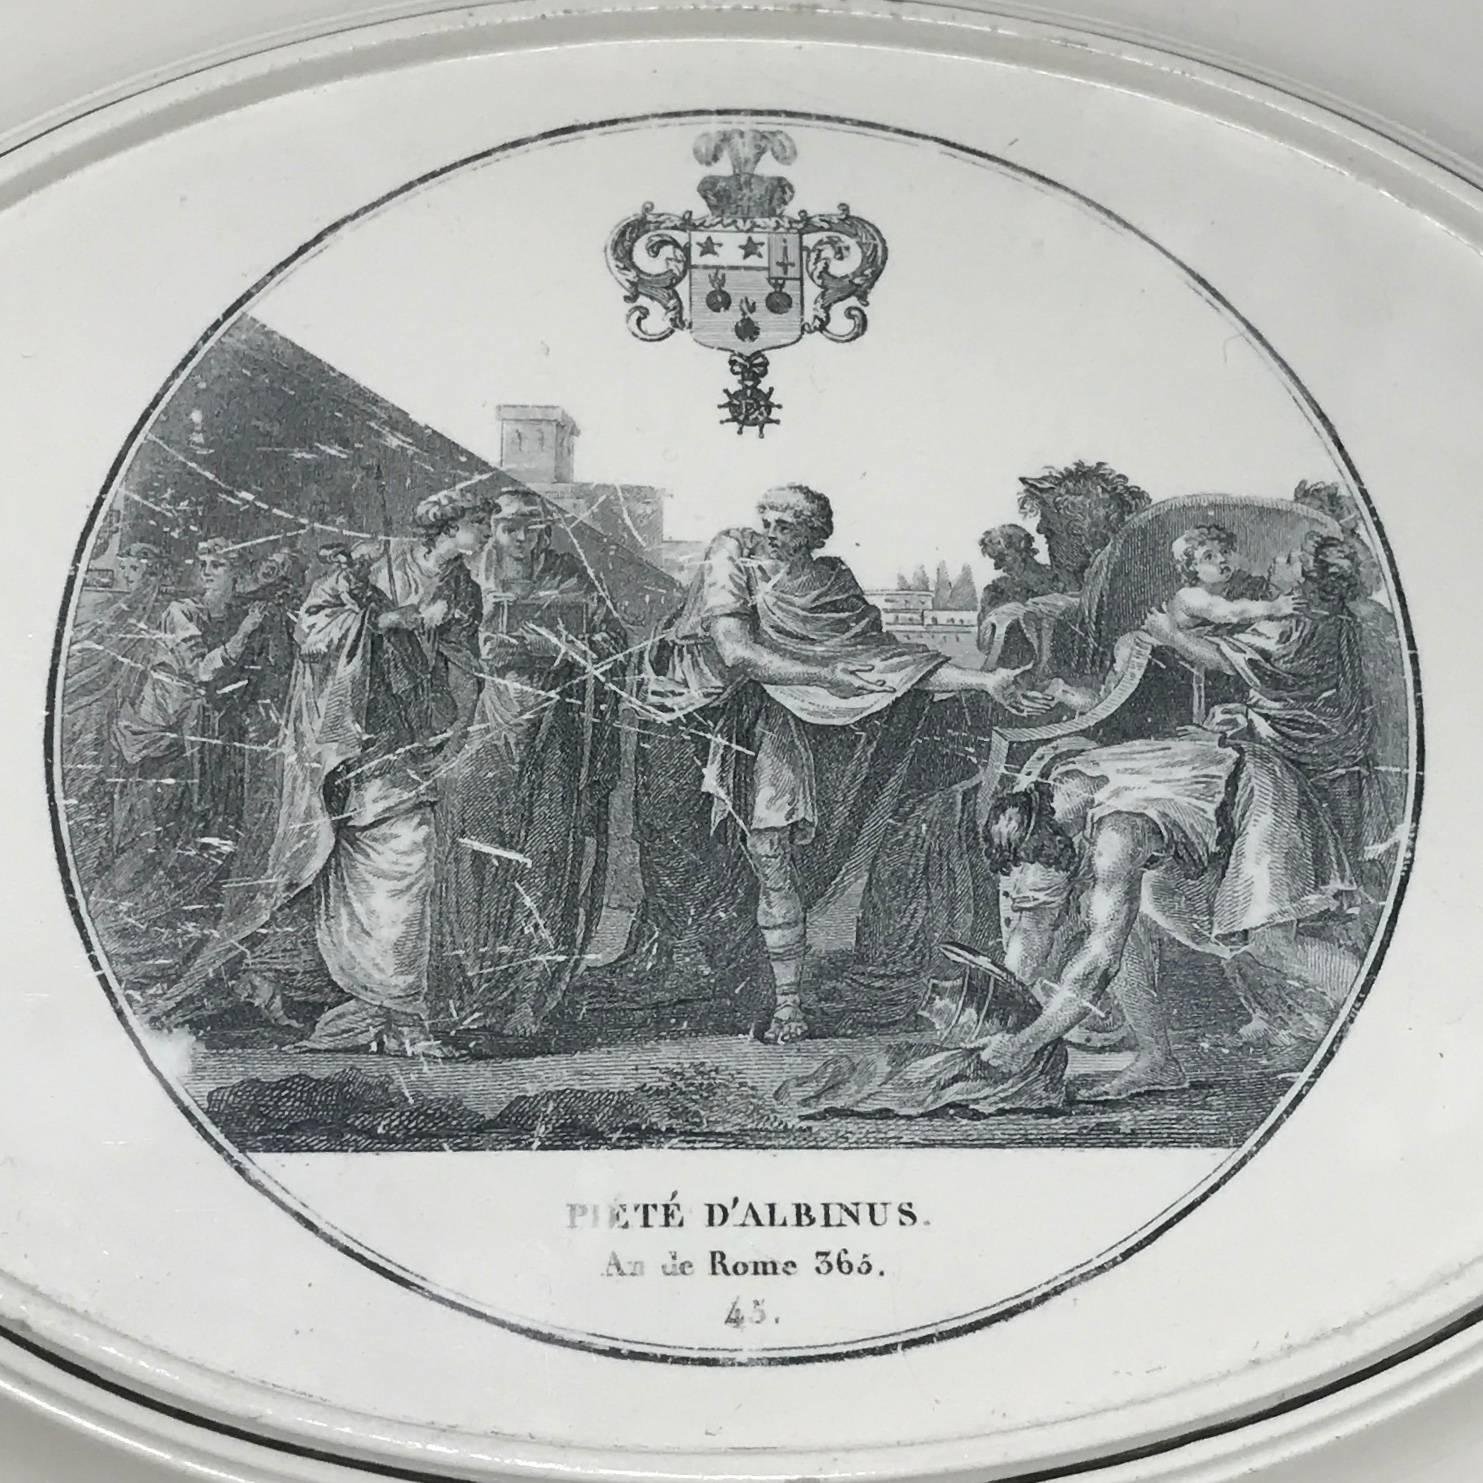 Large Creil plate. Antique neoclassical oval creamware serving platter from the "An de Rome" series, "The Piety of Albinus" with swan and armorial cartouche border. Impressed Creil, France, early 1800s.
Dimension: 16" W x